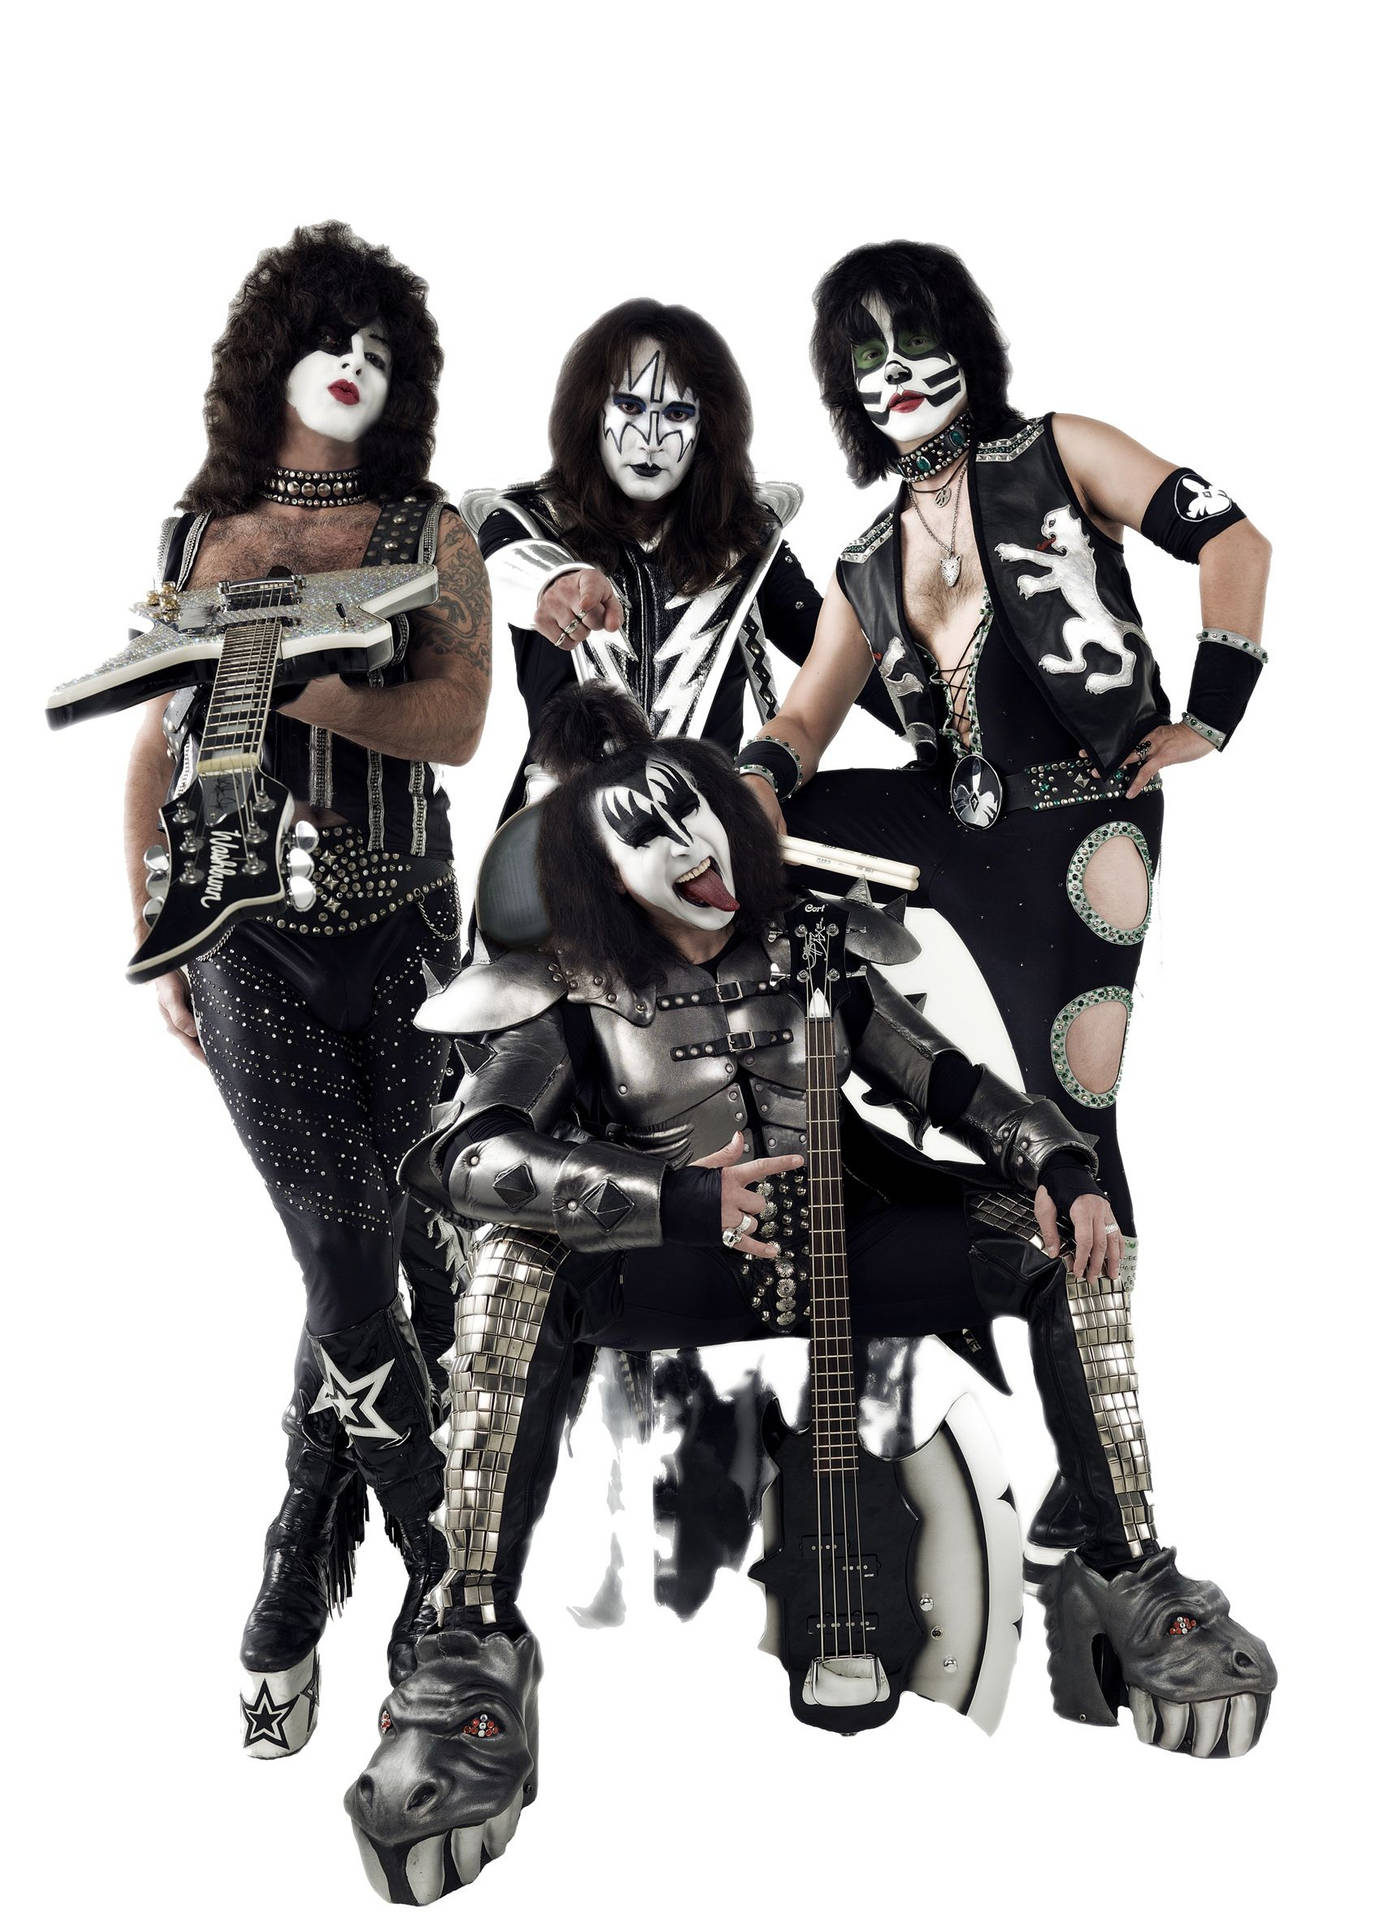 The Iconic Rockstars of Kiss Band in Action Wallpaper